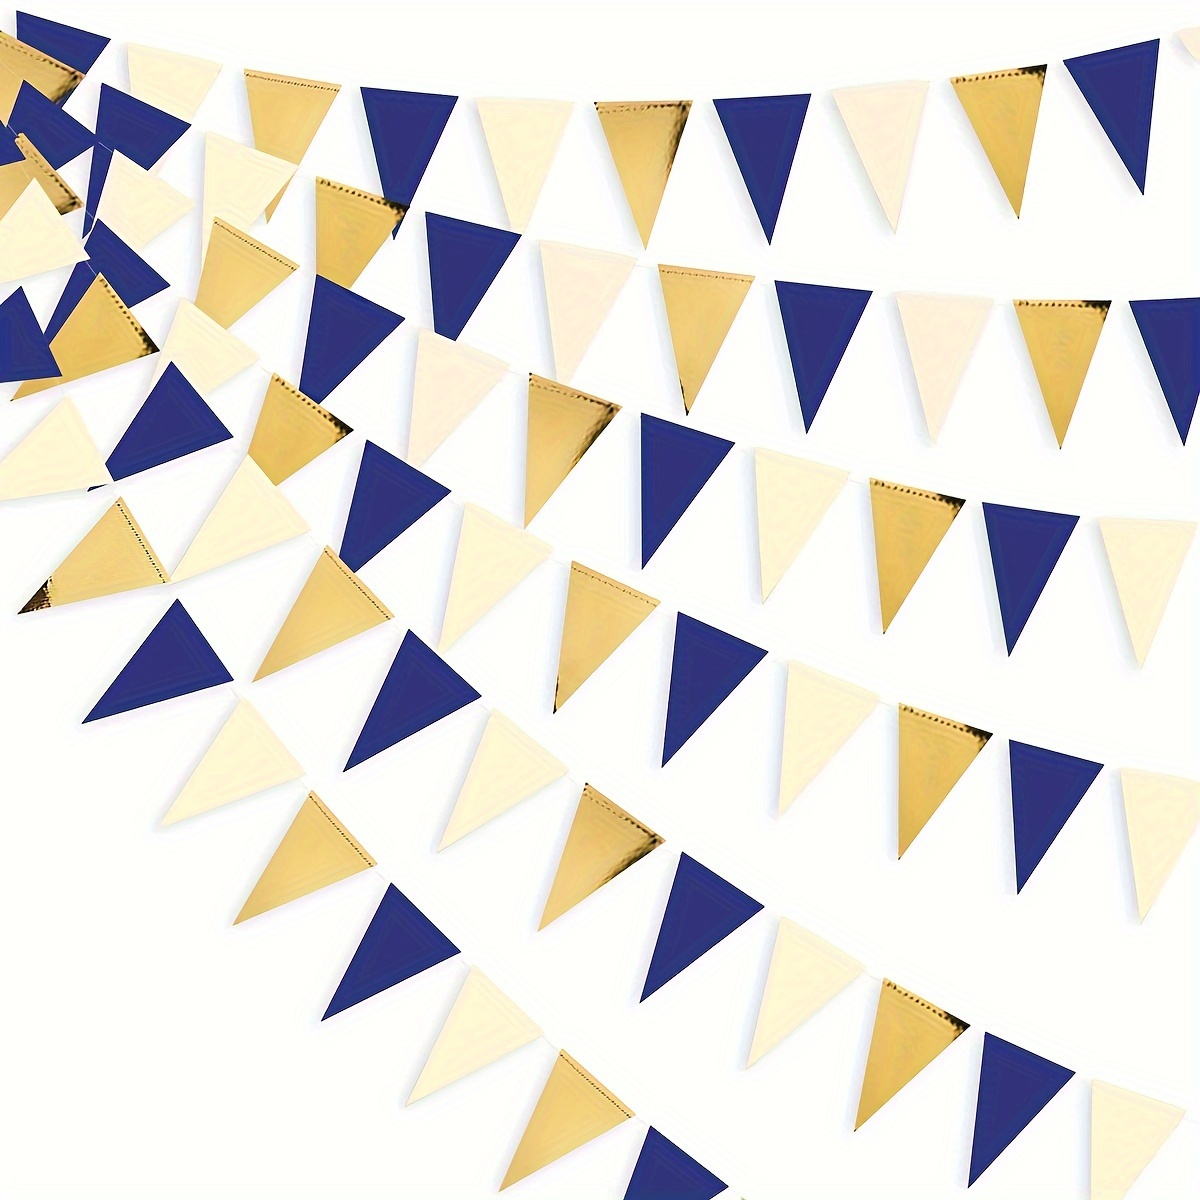 

3pcs, 30ft Navy Blue Gold And Beige Party Decorations Royal Blue Gold Triangle Flag Pennant Banner Bunting For Graduation Birthday Wedding Bridal Shower Nautical Party Decorations Supplies